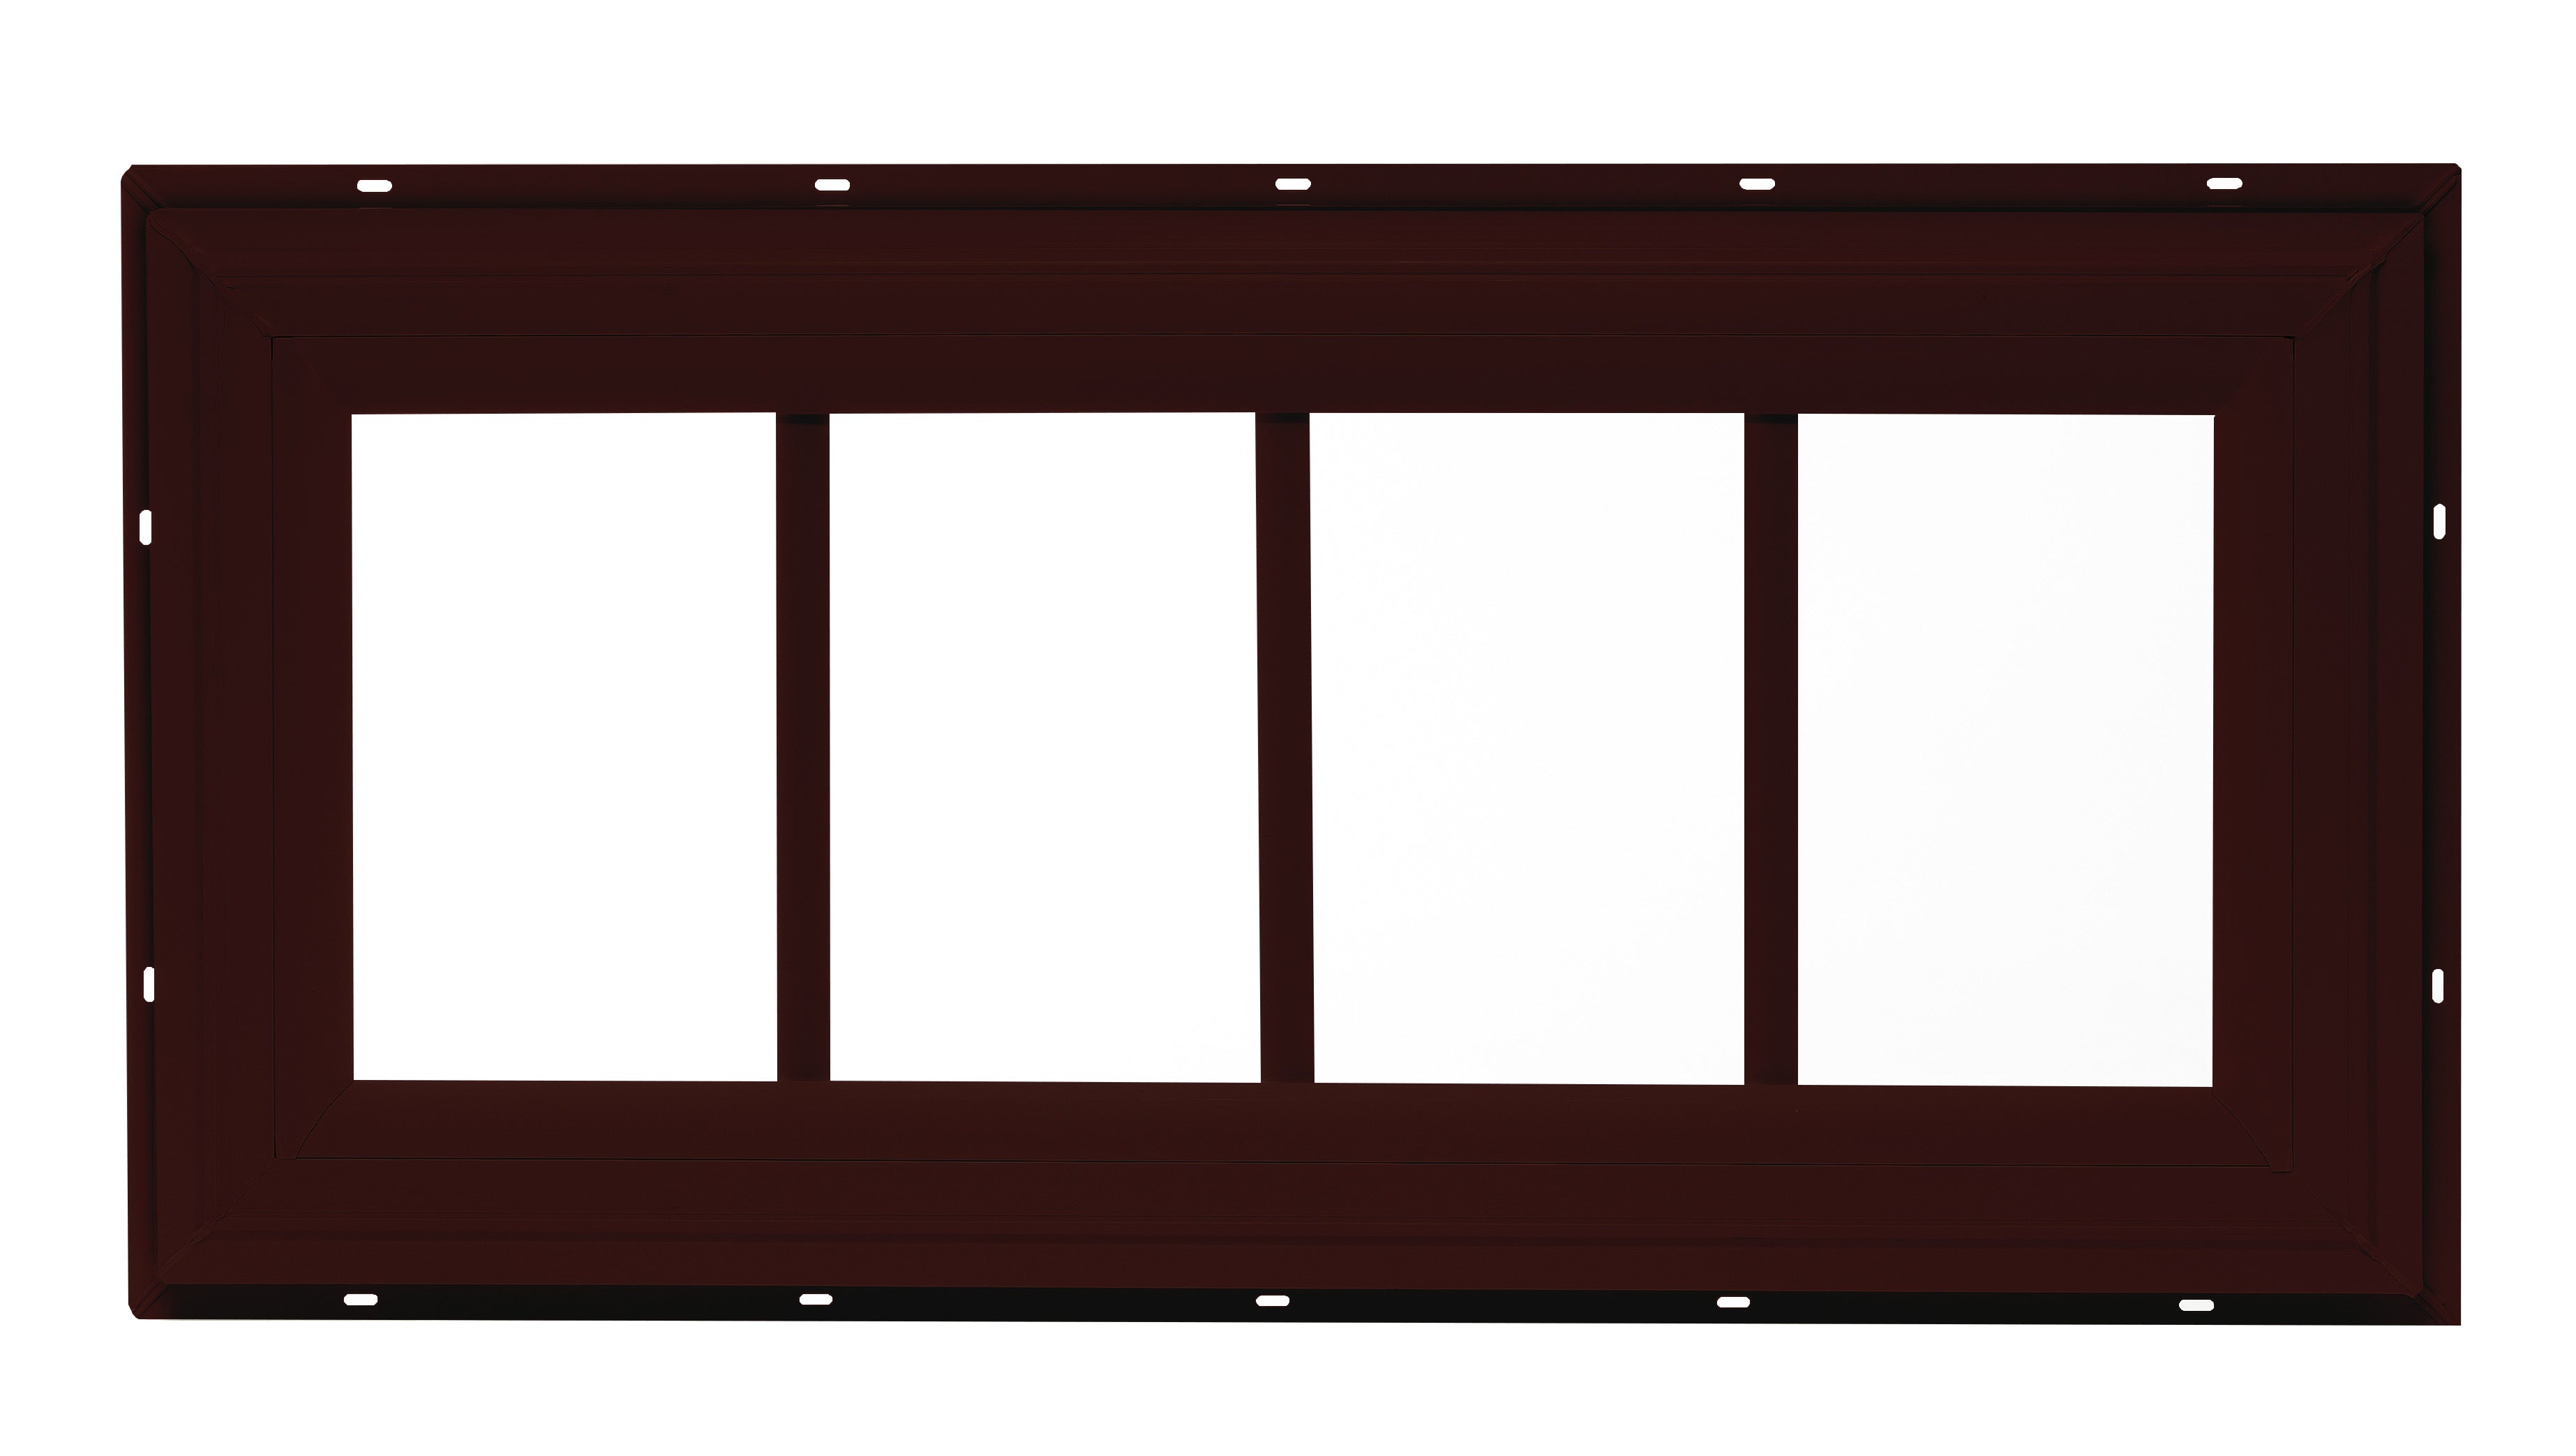 10.185" X 23" Transom J-Lap PVC Brown Window for Sheds, Playhouses, and MORE 